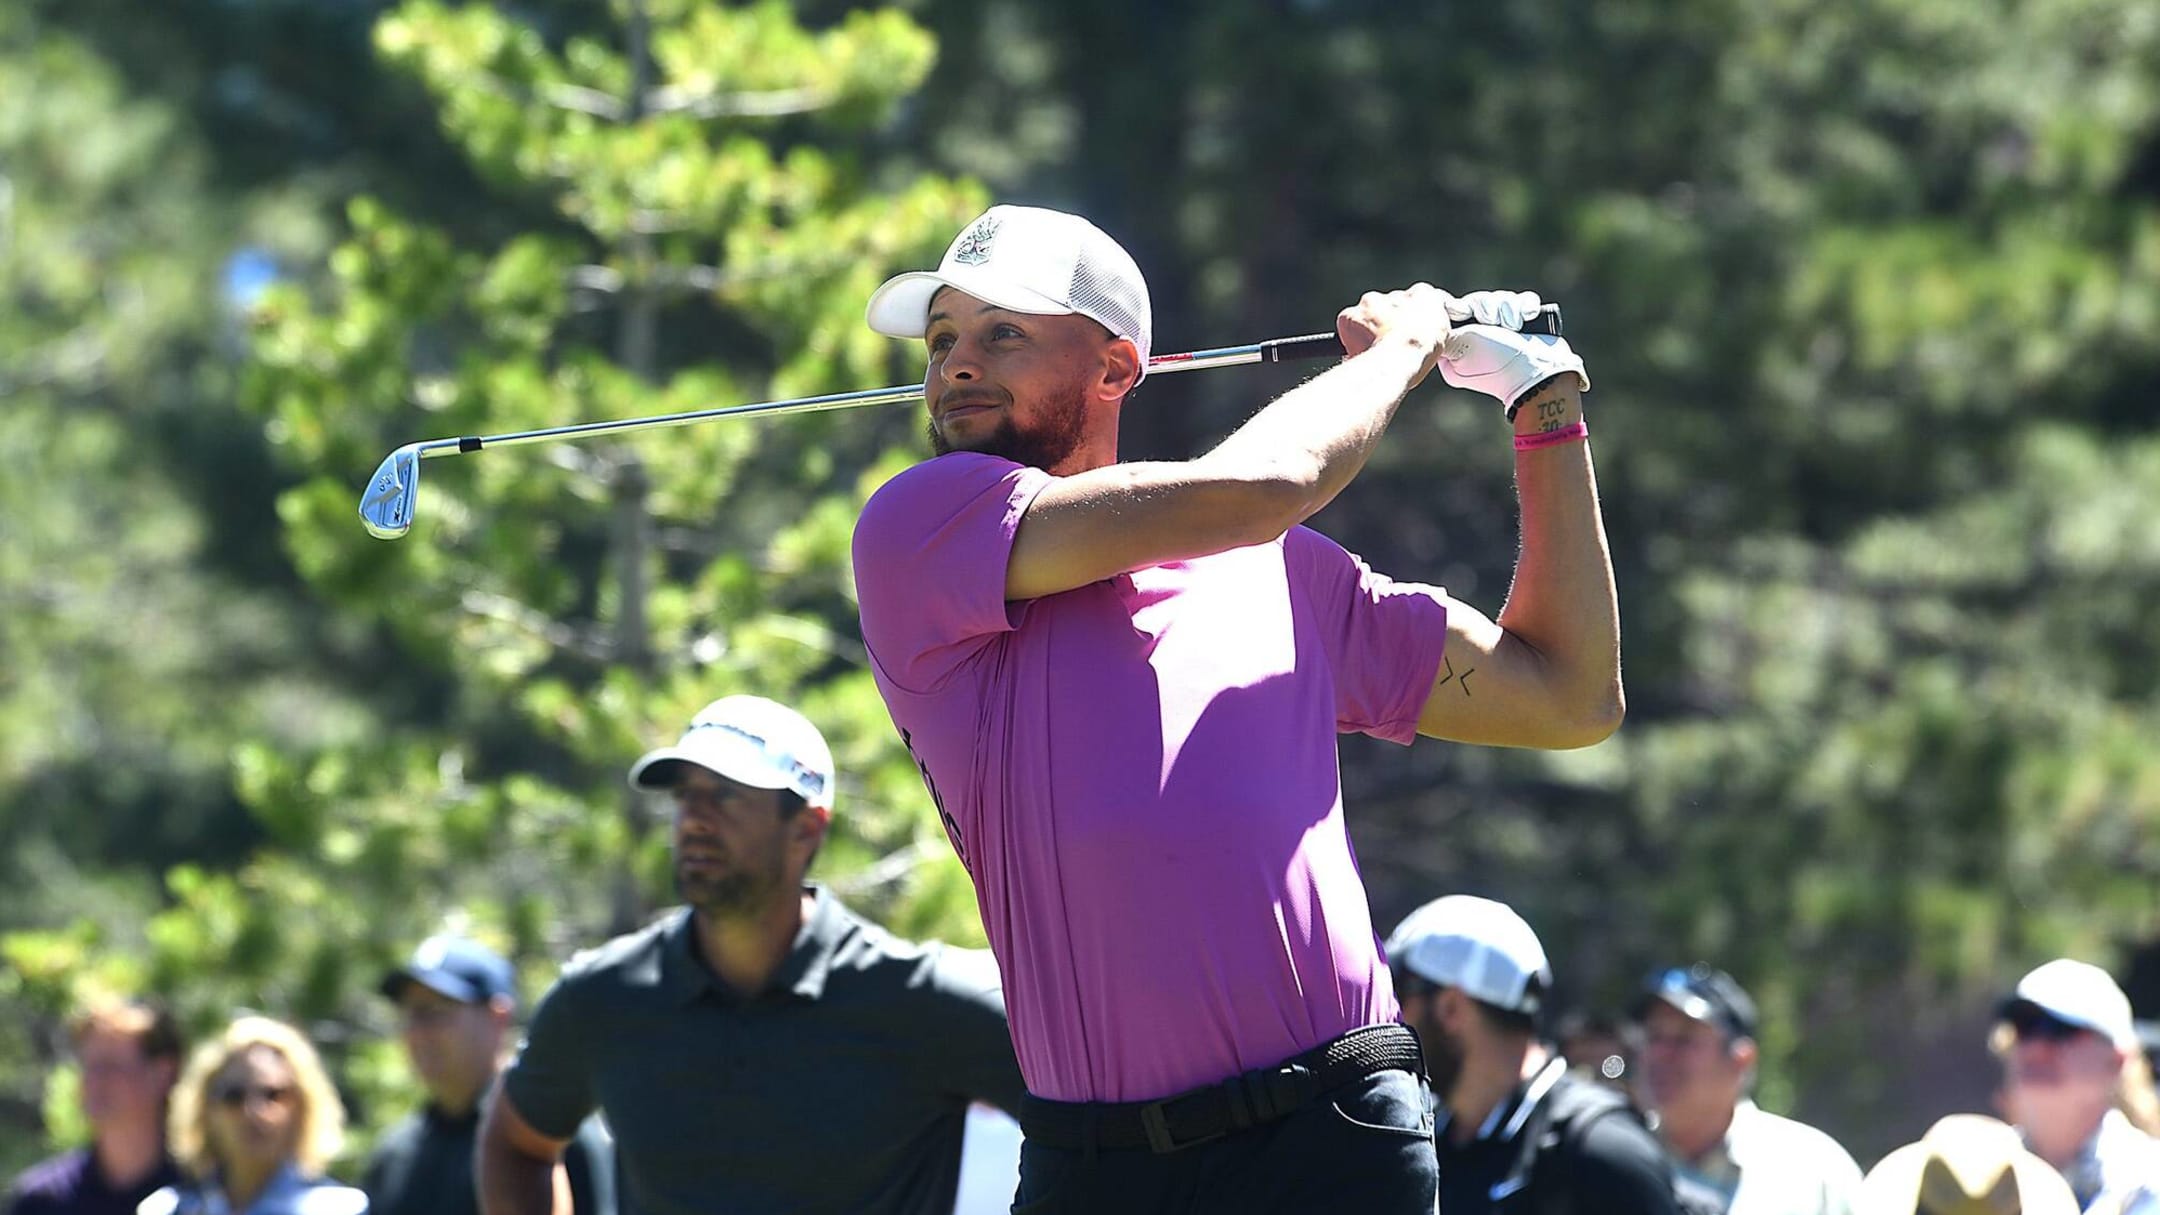 How pitching helped John Smoltz become an elite amateur golfer